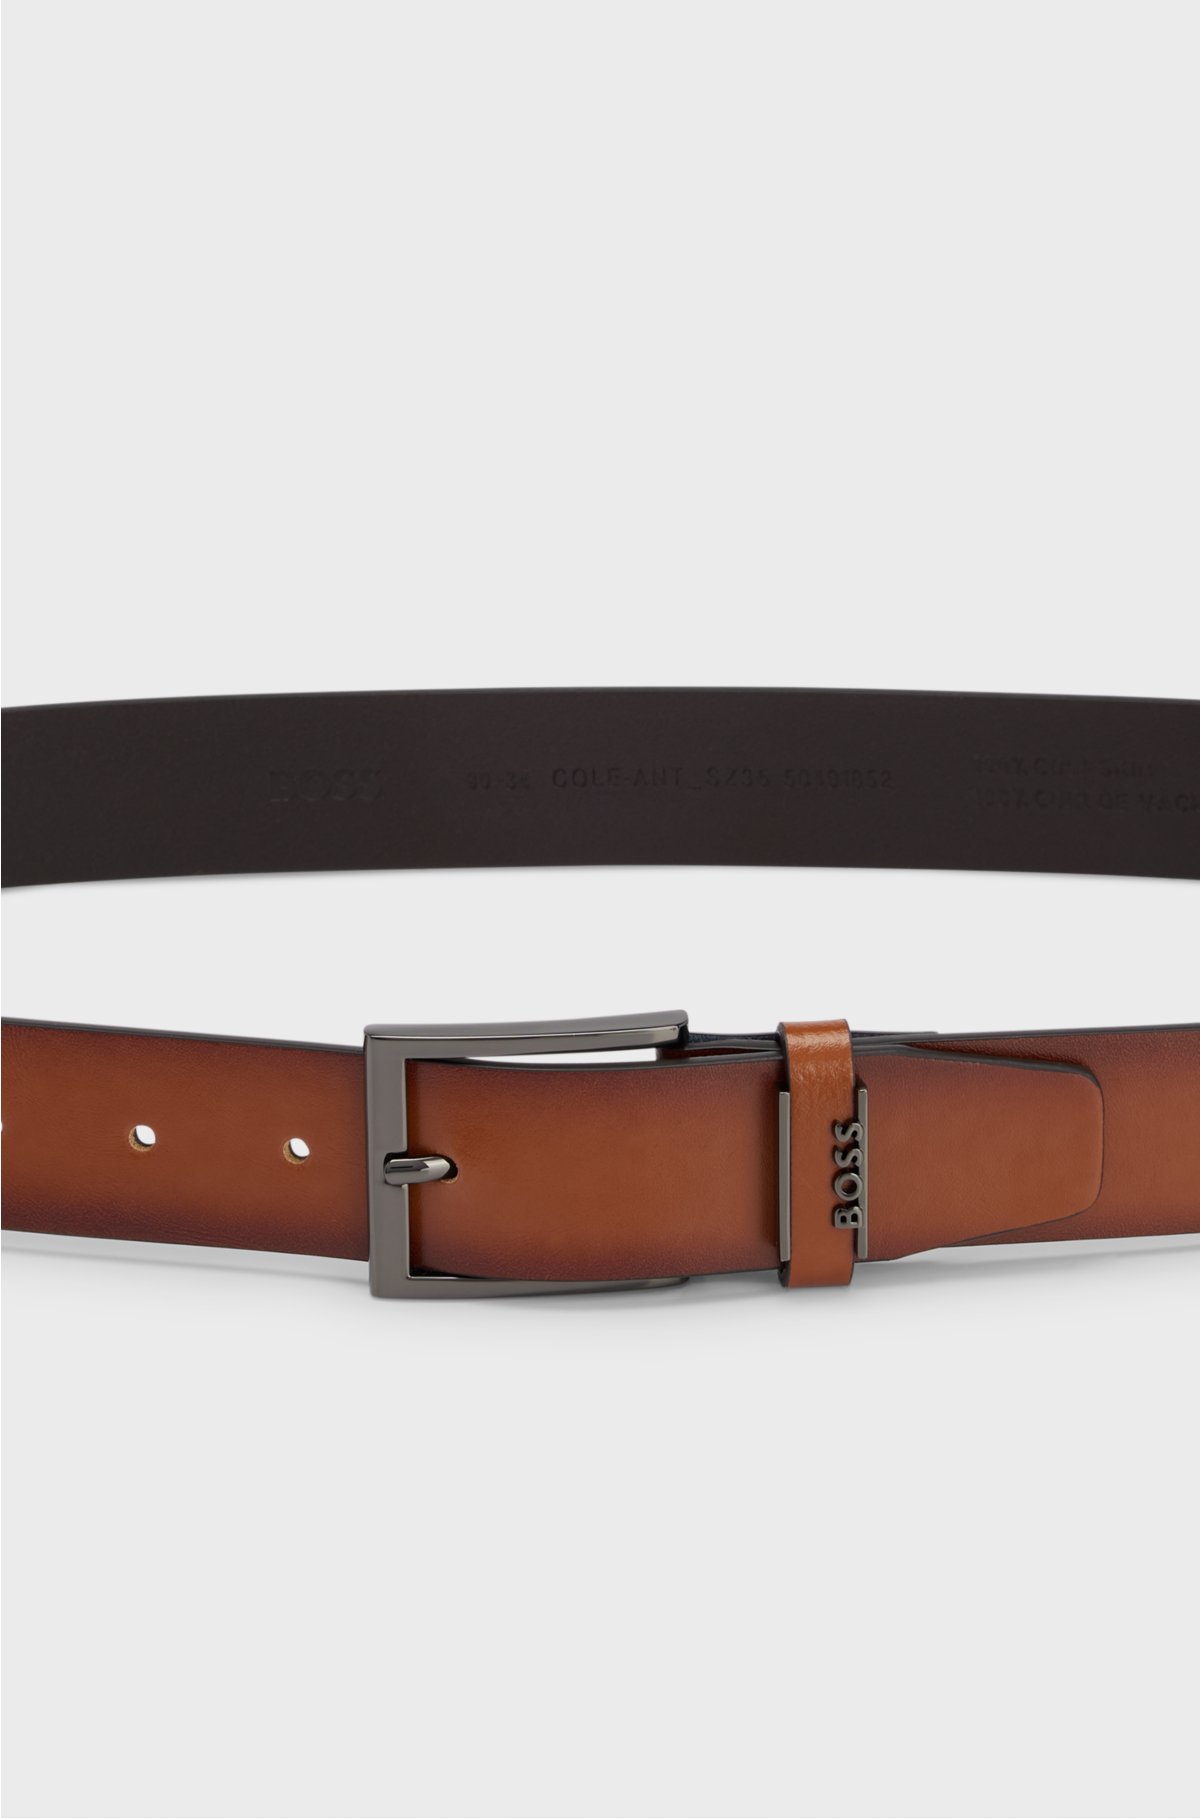 Italian-leather belt with logo keeper, Brown